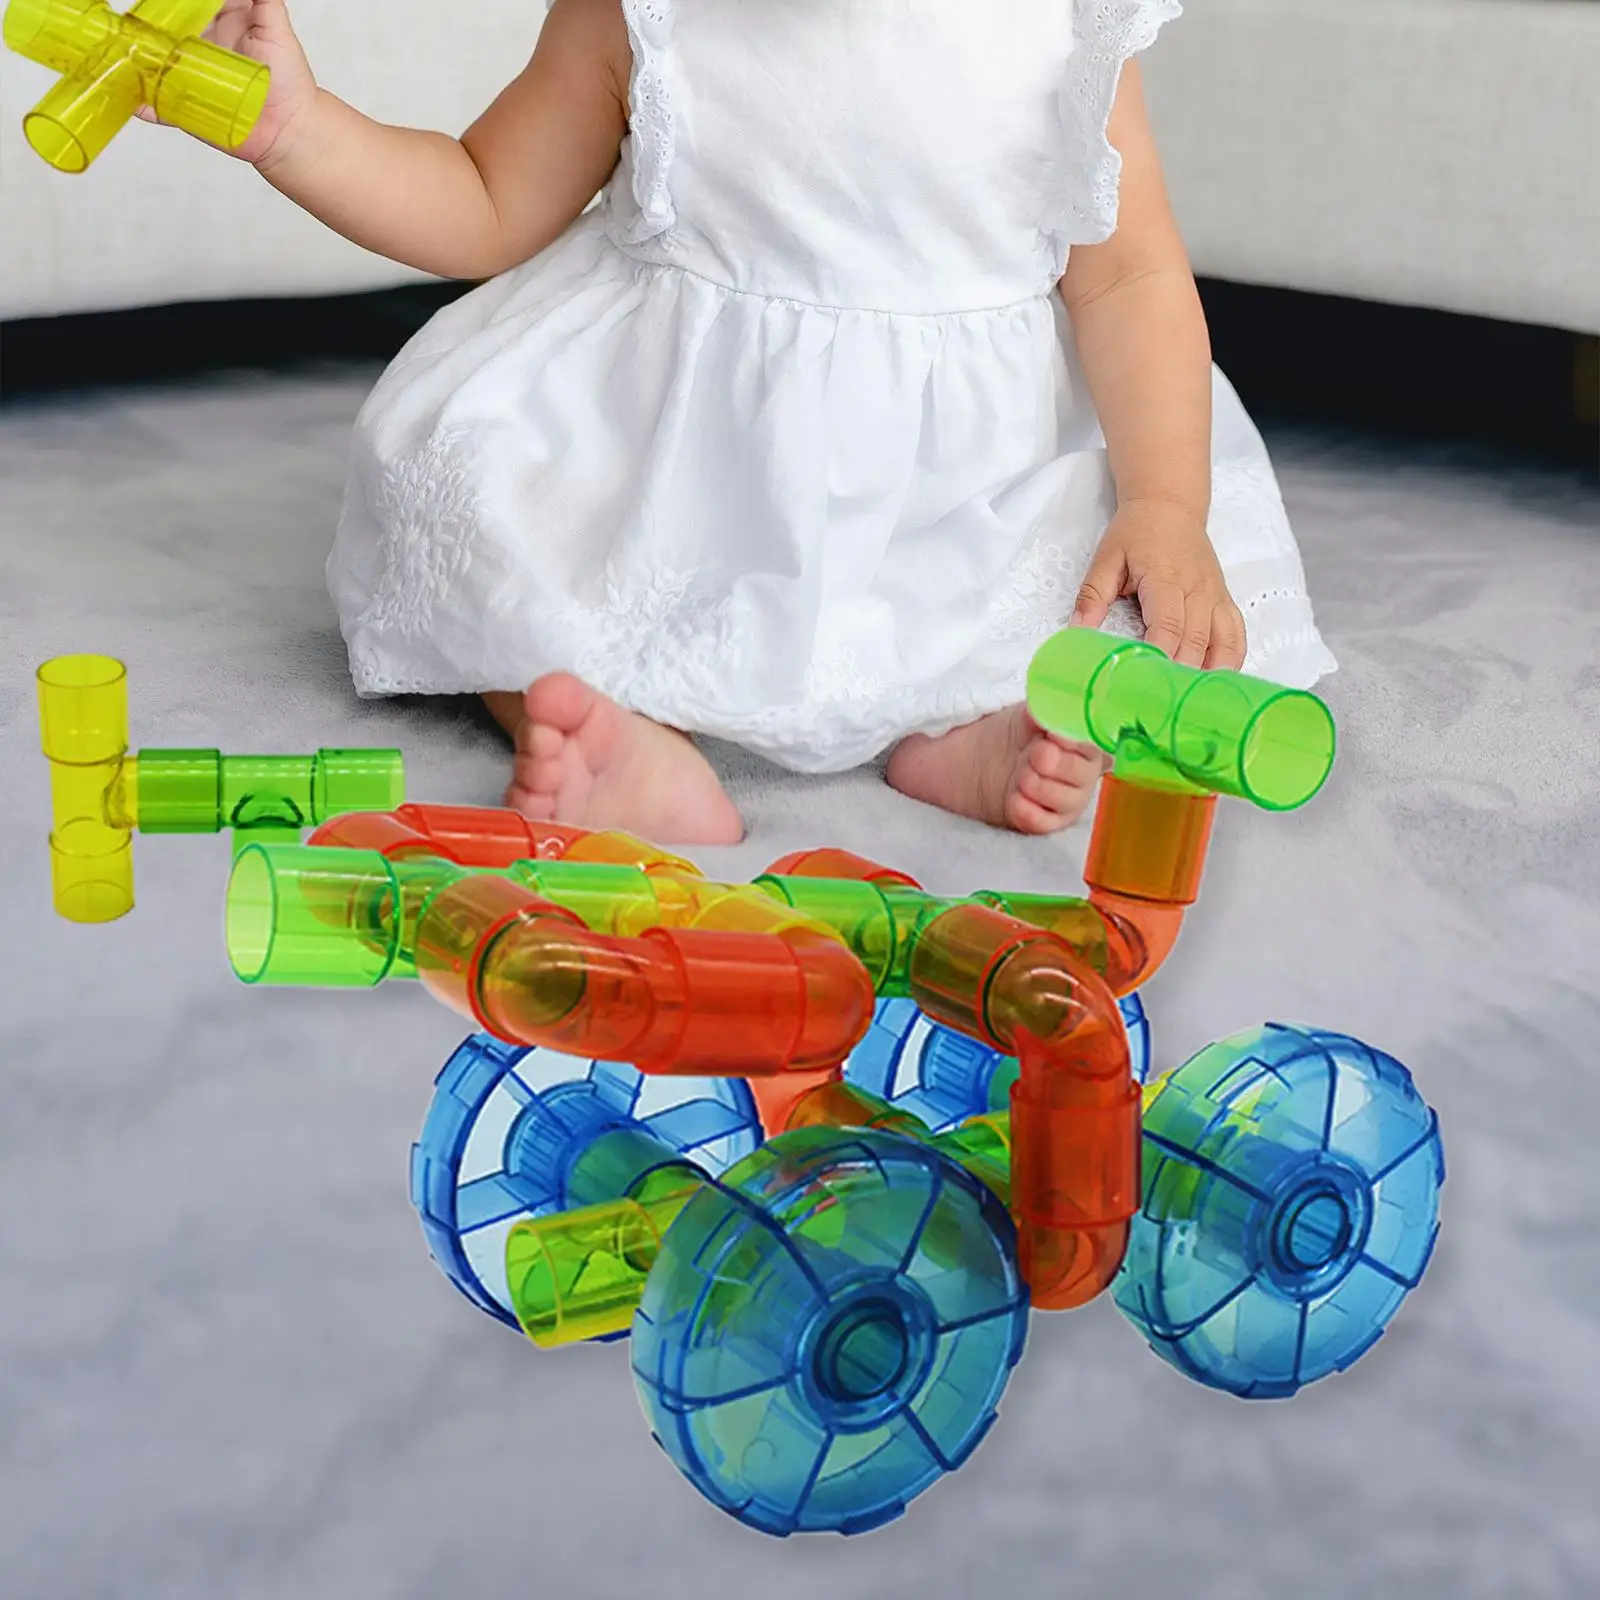 Pipe Tube Toy Learning Toy Educational Stem Building Learning for Toddlers Kids Boy Girls